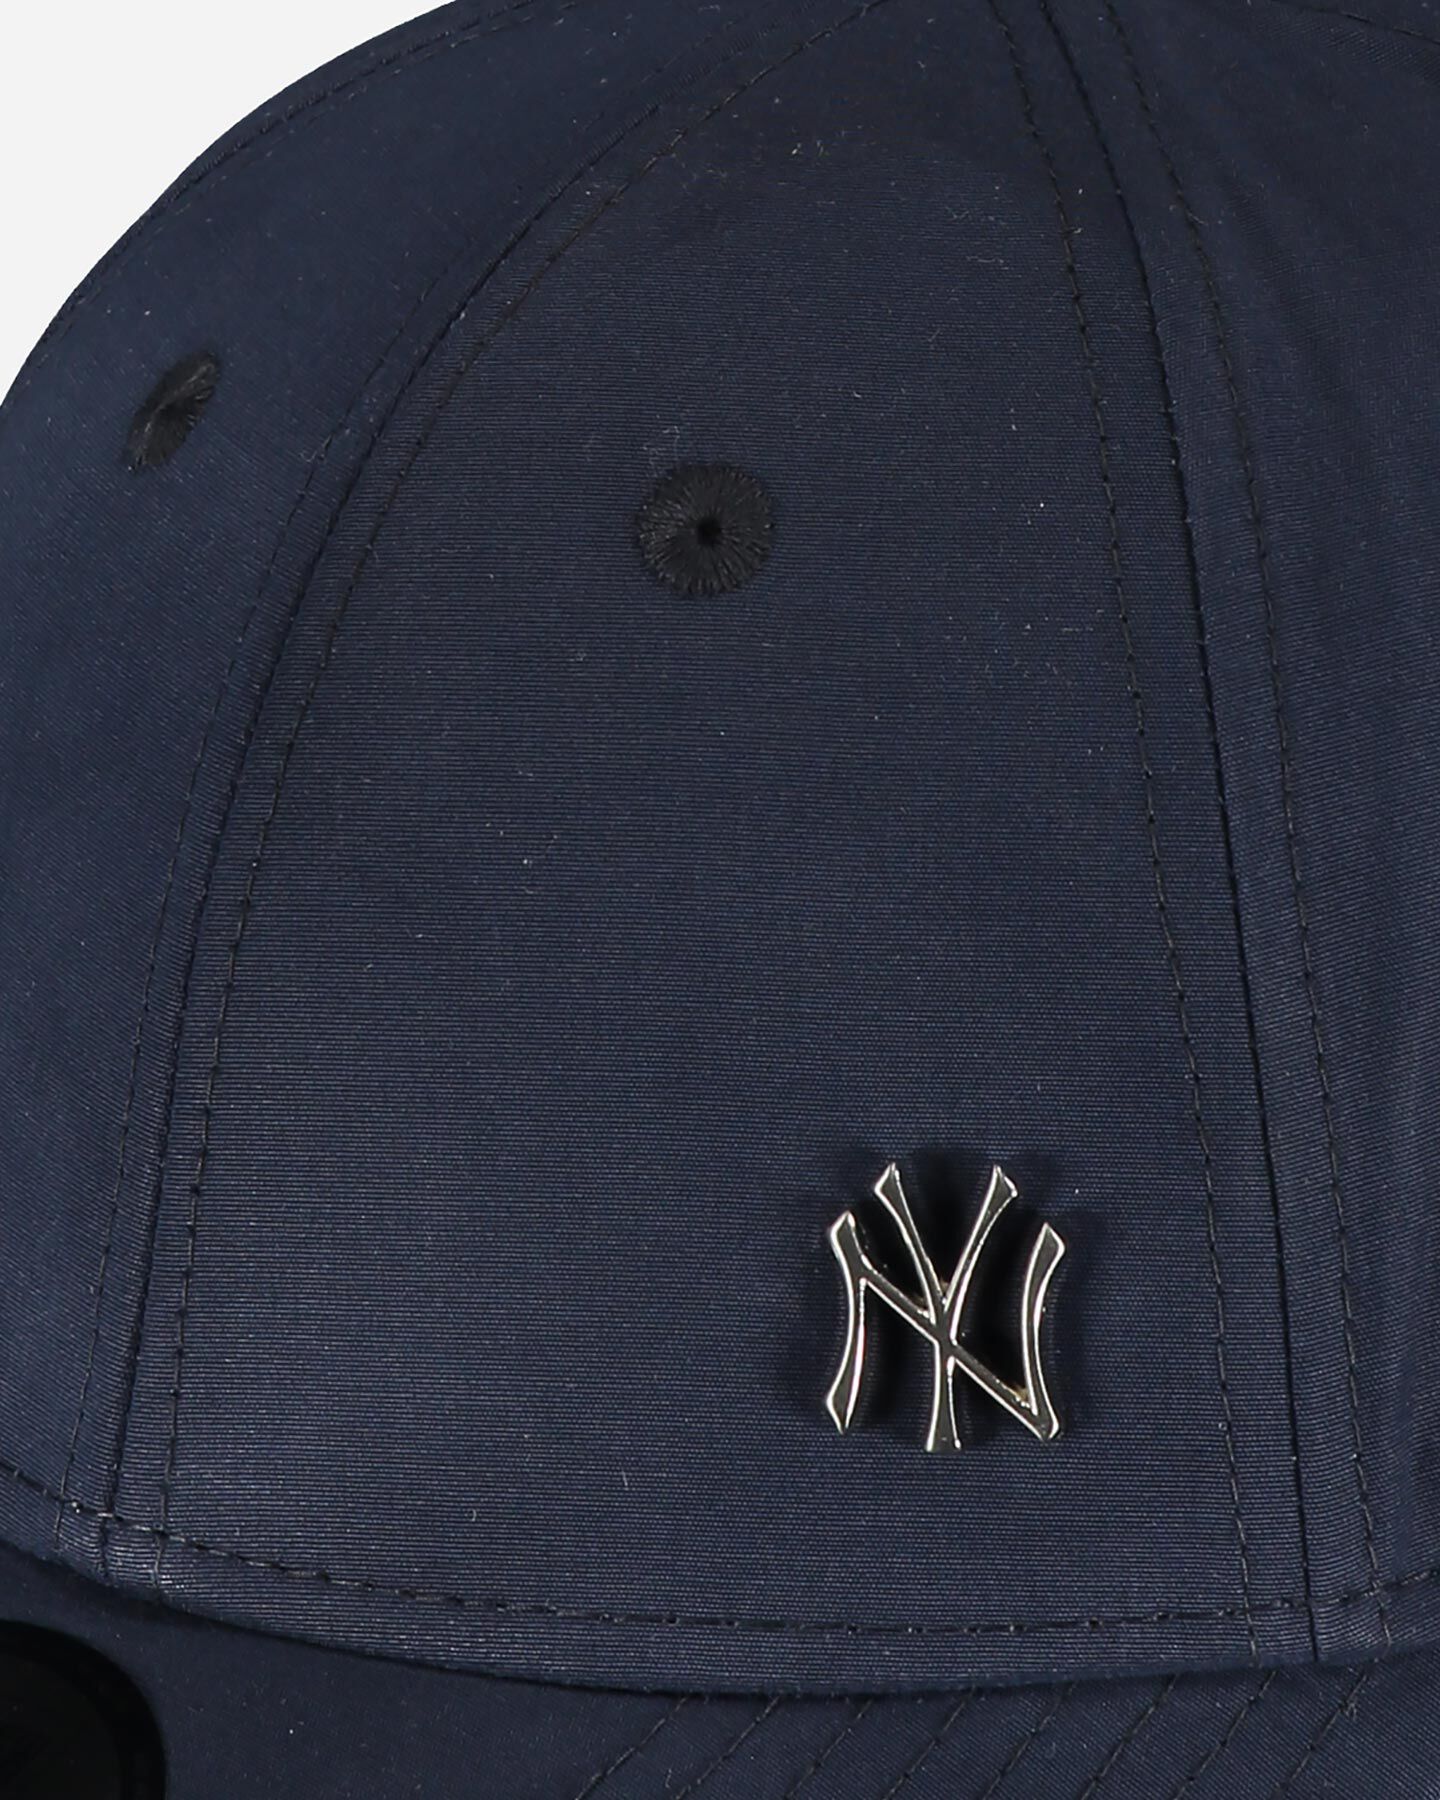  Cappellino NEW ERA 9FORTY FLAWLESS NEW YORK YANKEES M S5061562|410|OSFA scatto 2